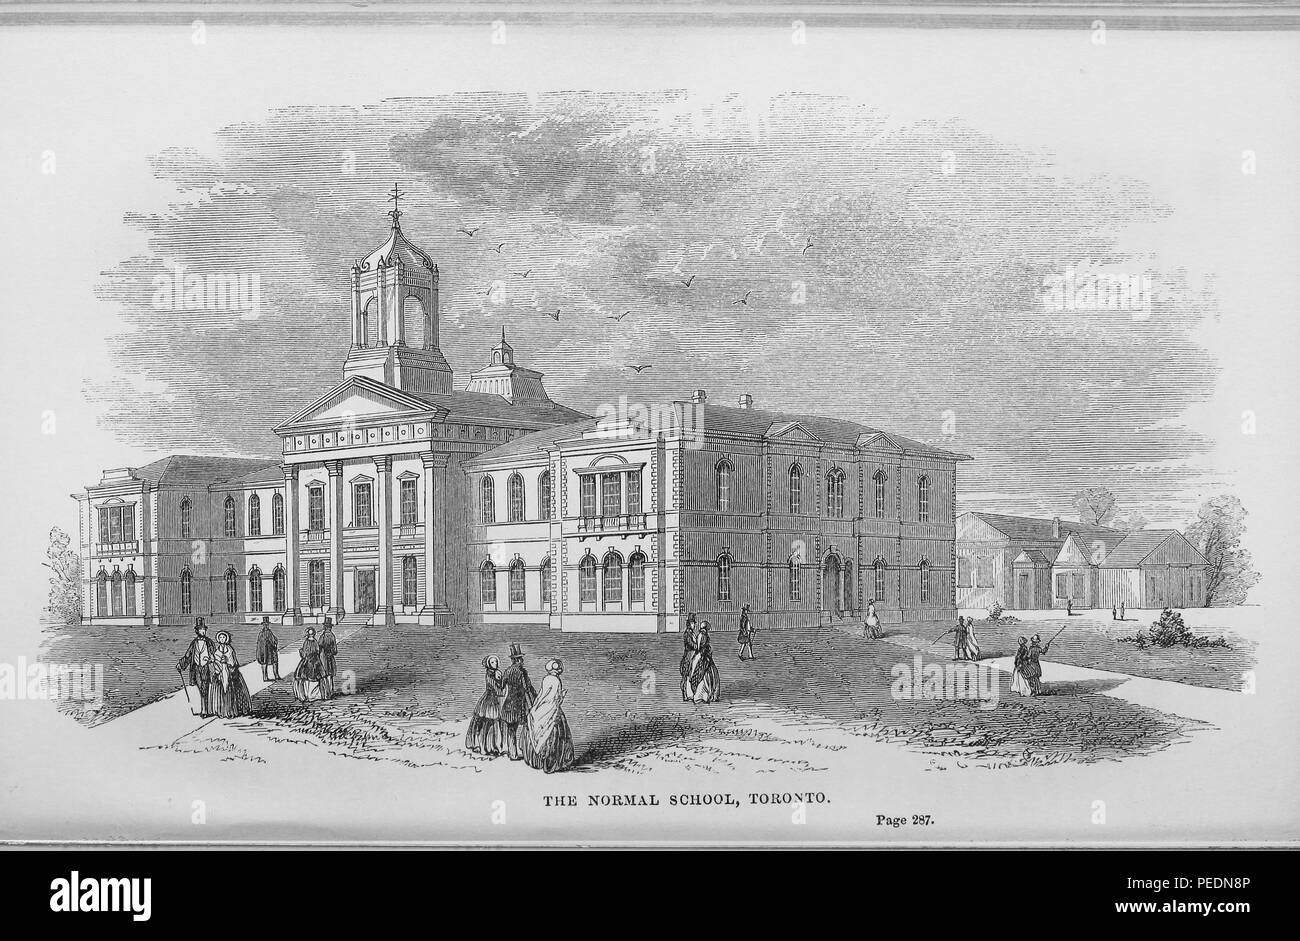 Black and white print of a teacher's college, located in Ontario, Canada, captioned 'The Normal School, Toronto, ' depicting a large, classical revival building, with a central tower and a small gable surmounting the entrance, and pedestrians in Victorian dress in the foreground, 1857. Courtesy Internet Archive. () Stock Photo